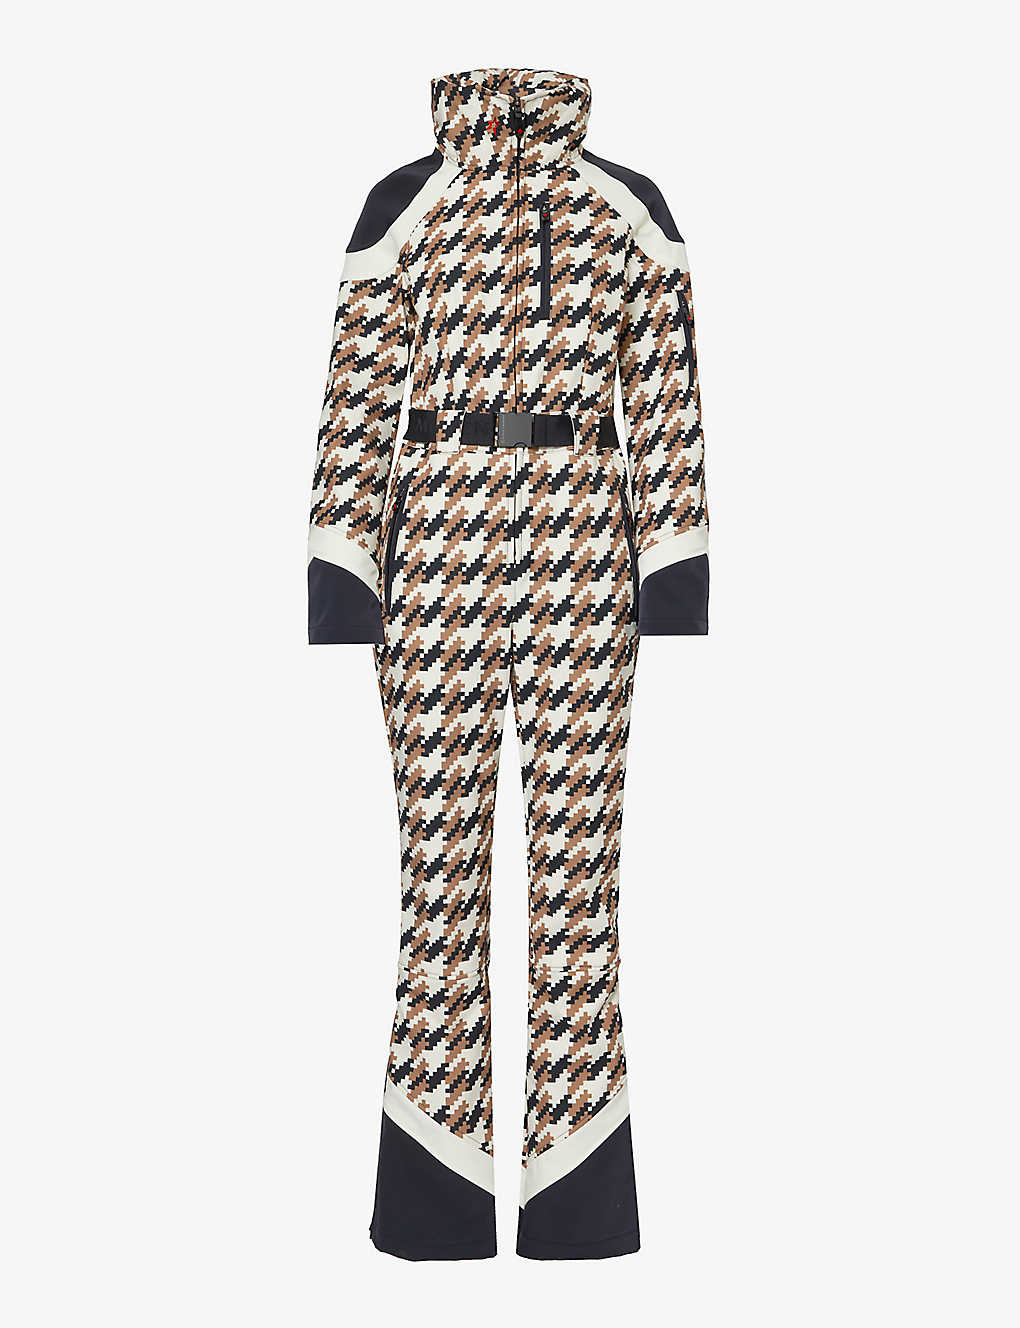 Shop Perfect Moment Women's Houndstooth Iconic Camel Allos Houndstooth-checked Ski Suit